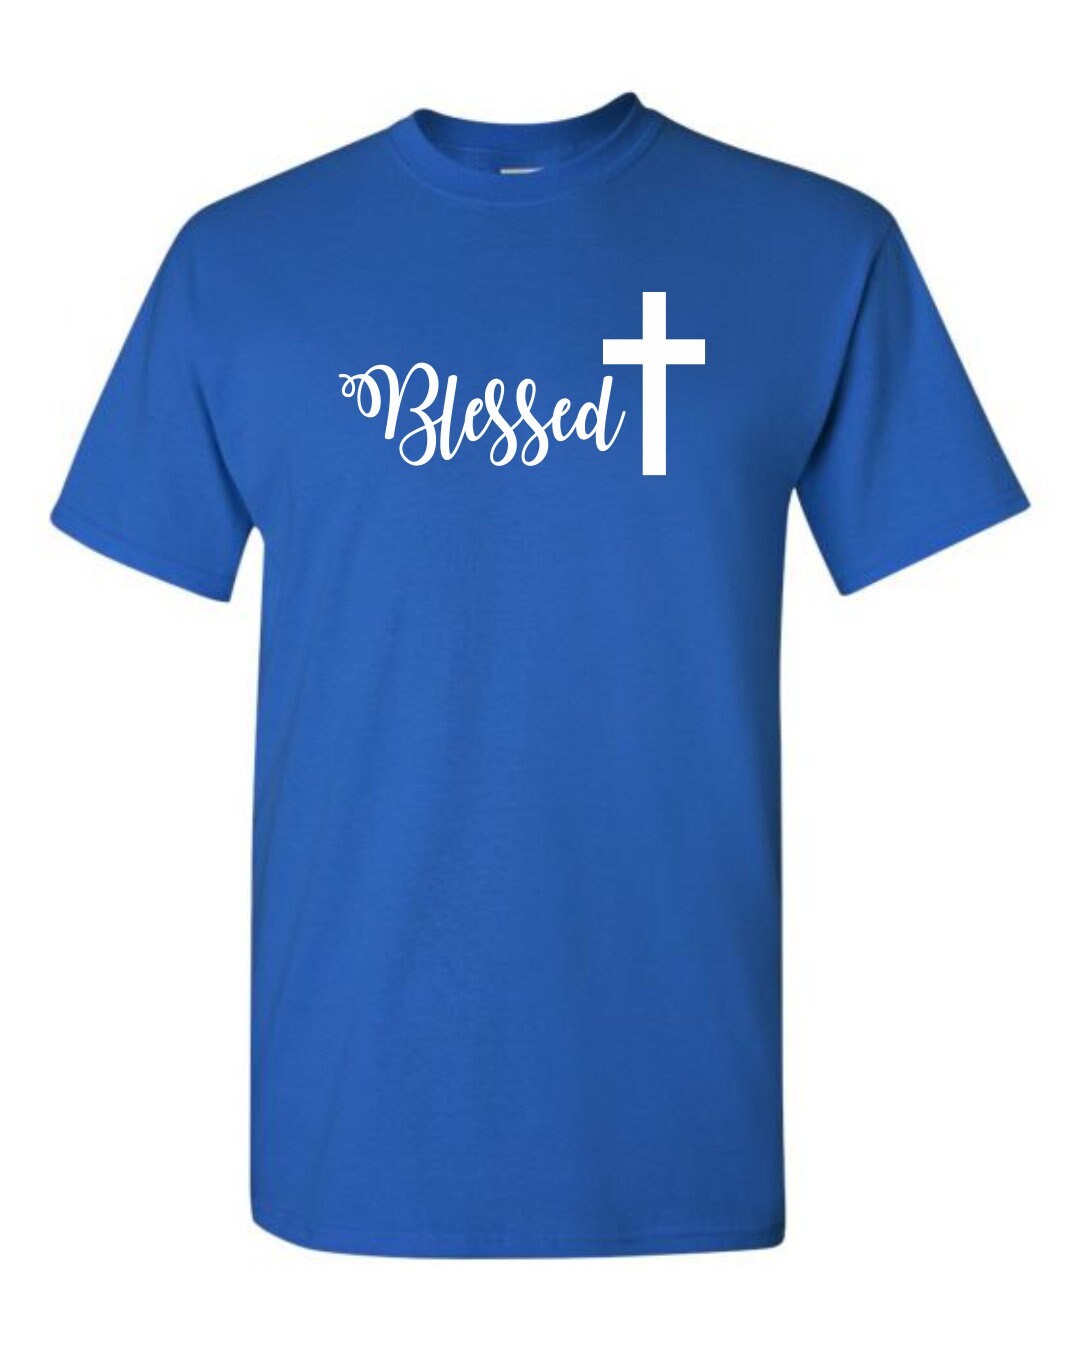 Blessed with Cross Shirt Simple Script Christian Blessed | Etsy